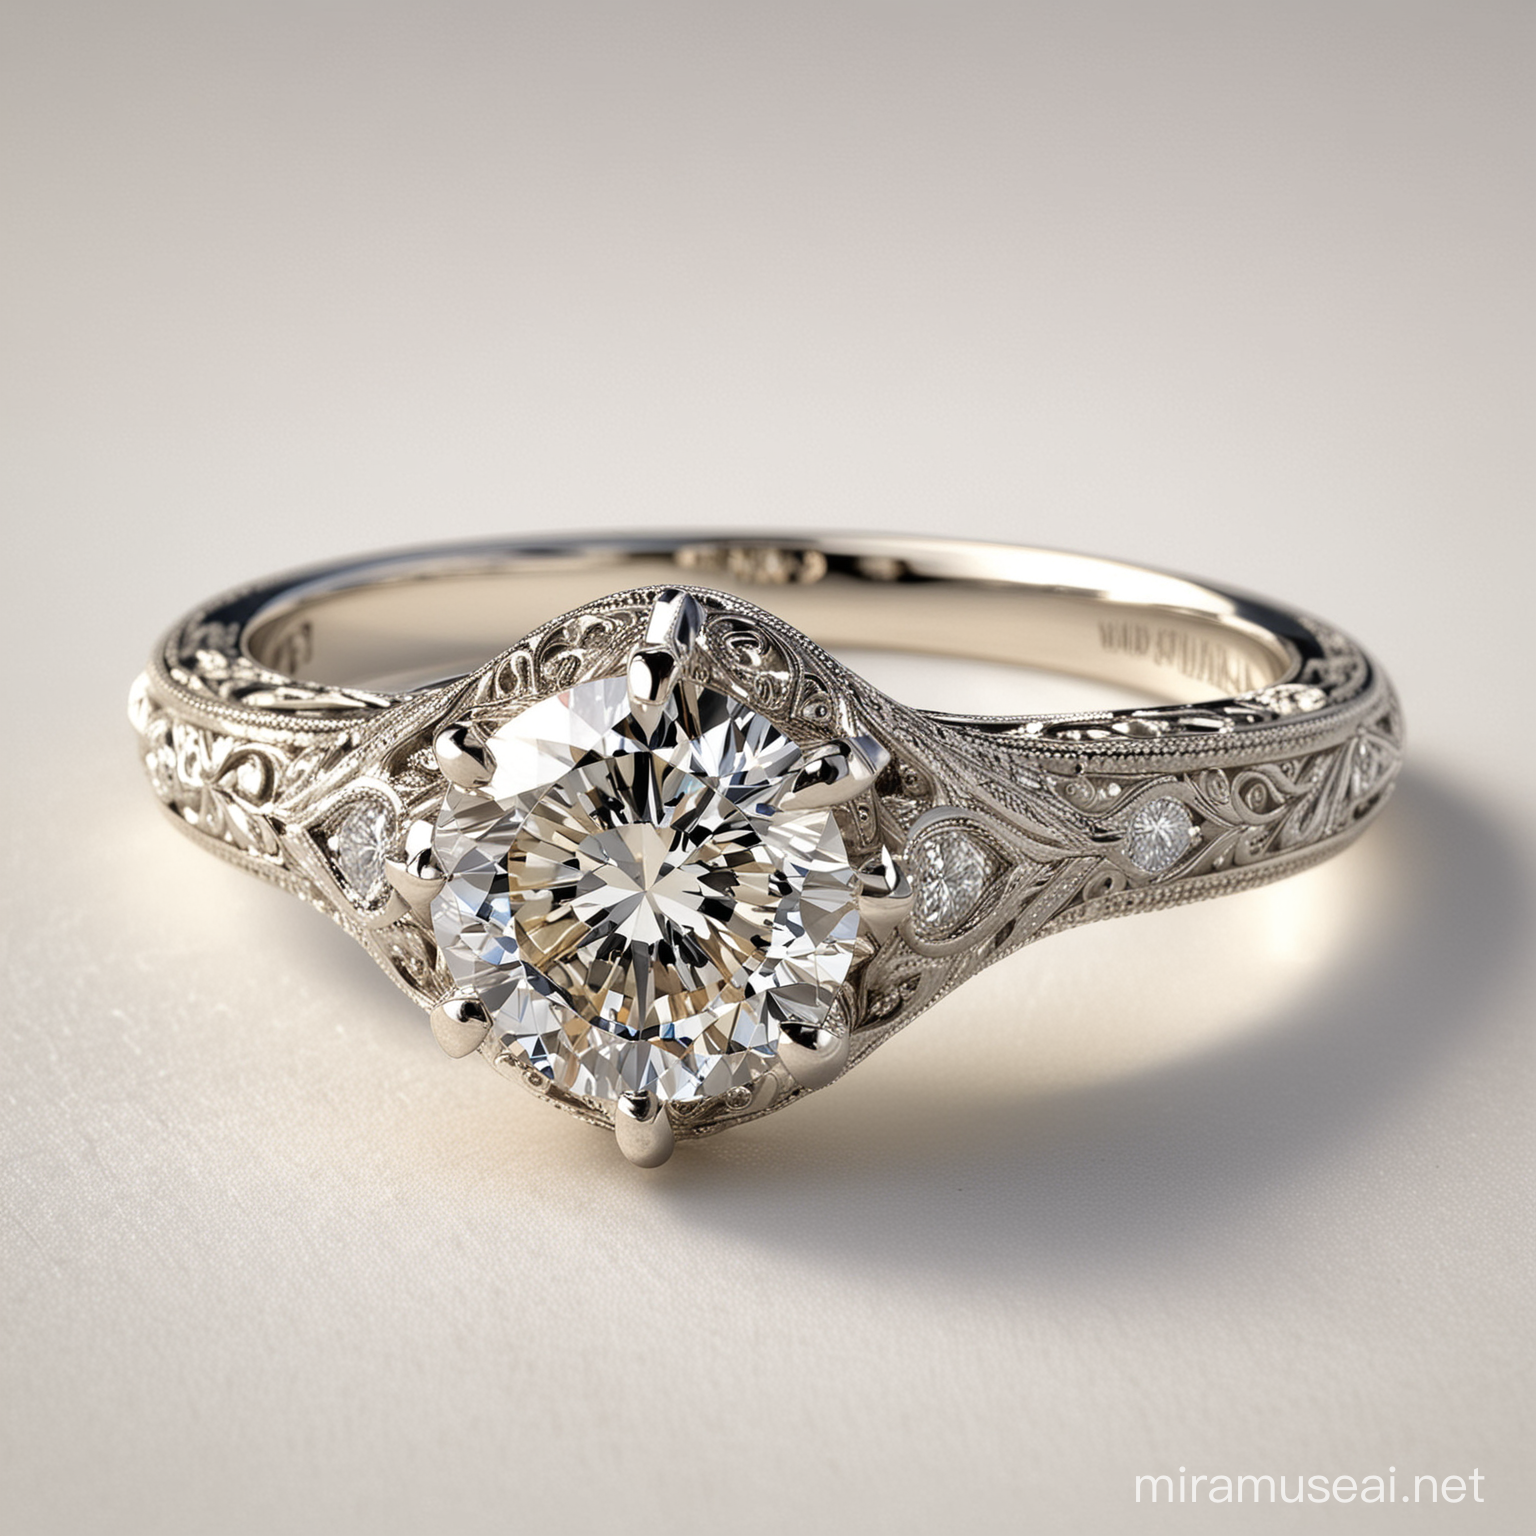  vintage engagement ring with ornate designs and floral motifs